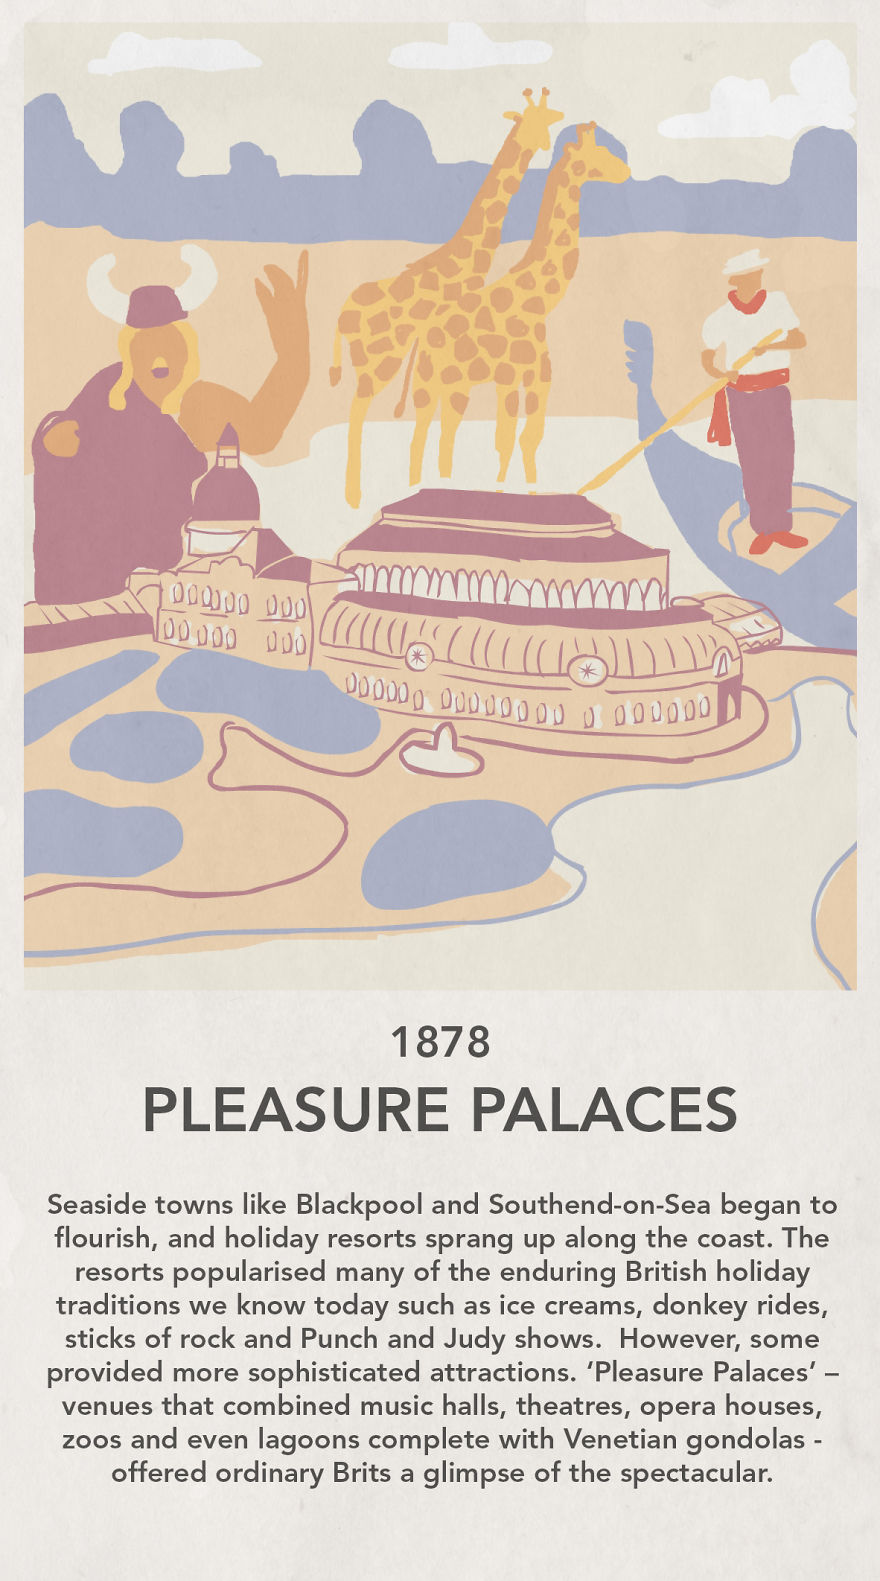 We Made Vintage Posters Showing Nostalgic Holiday History